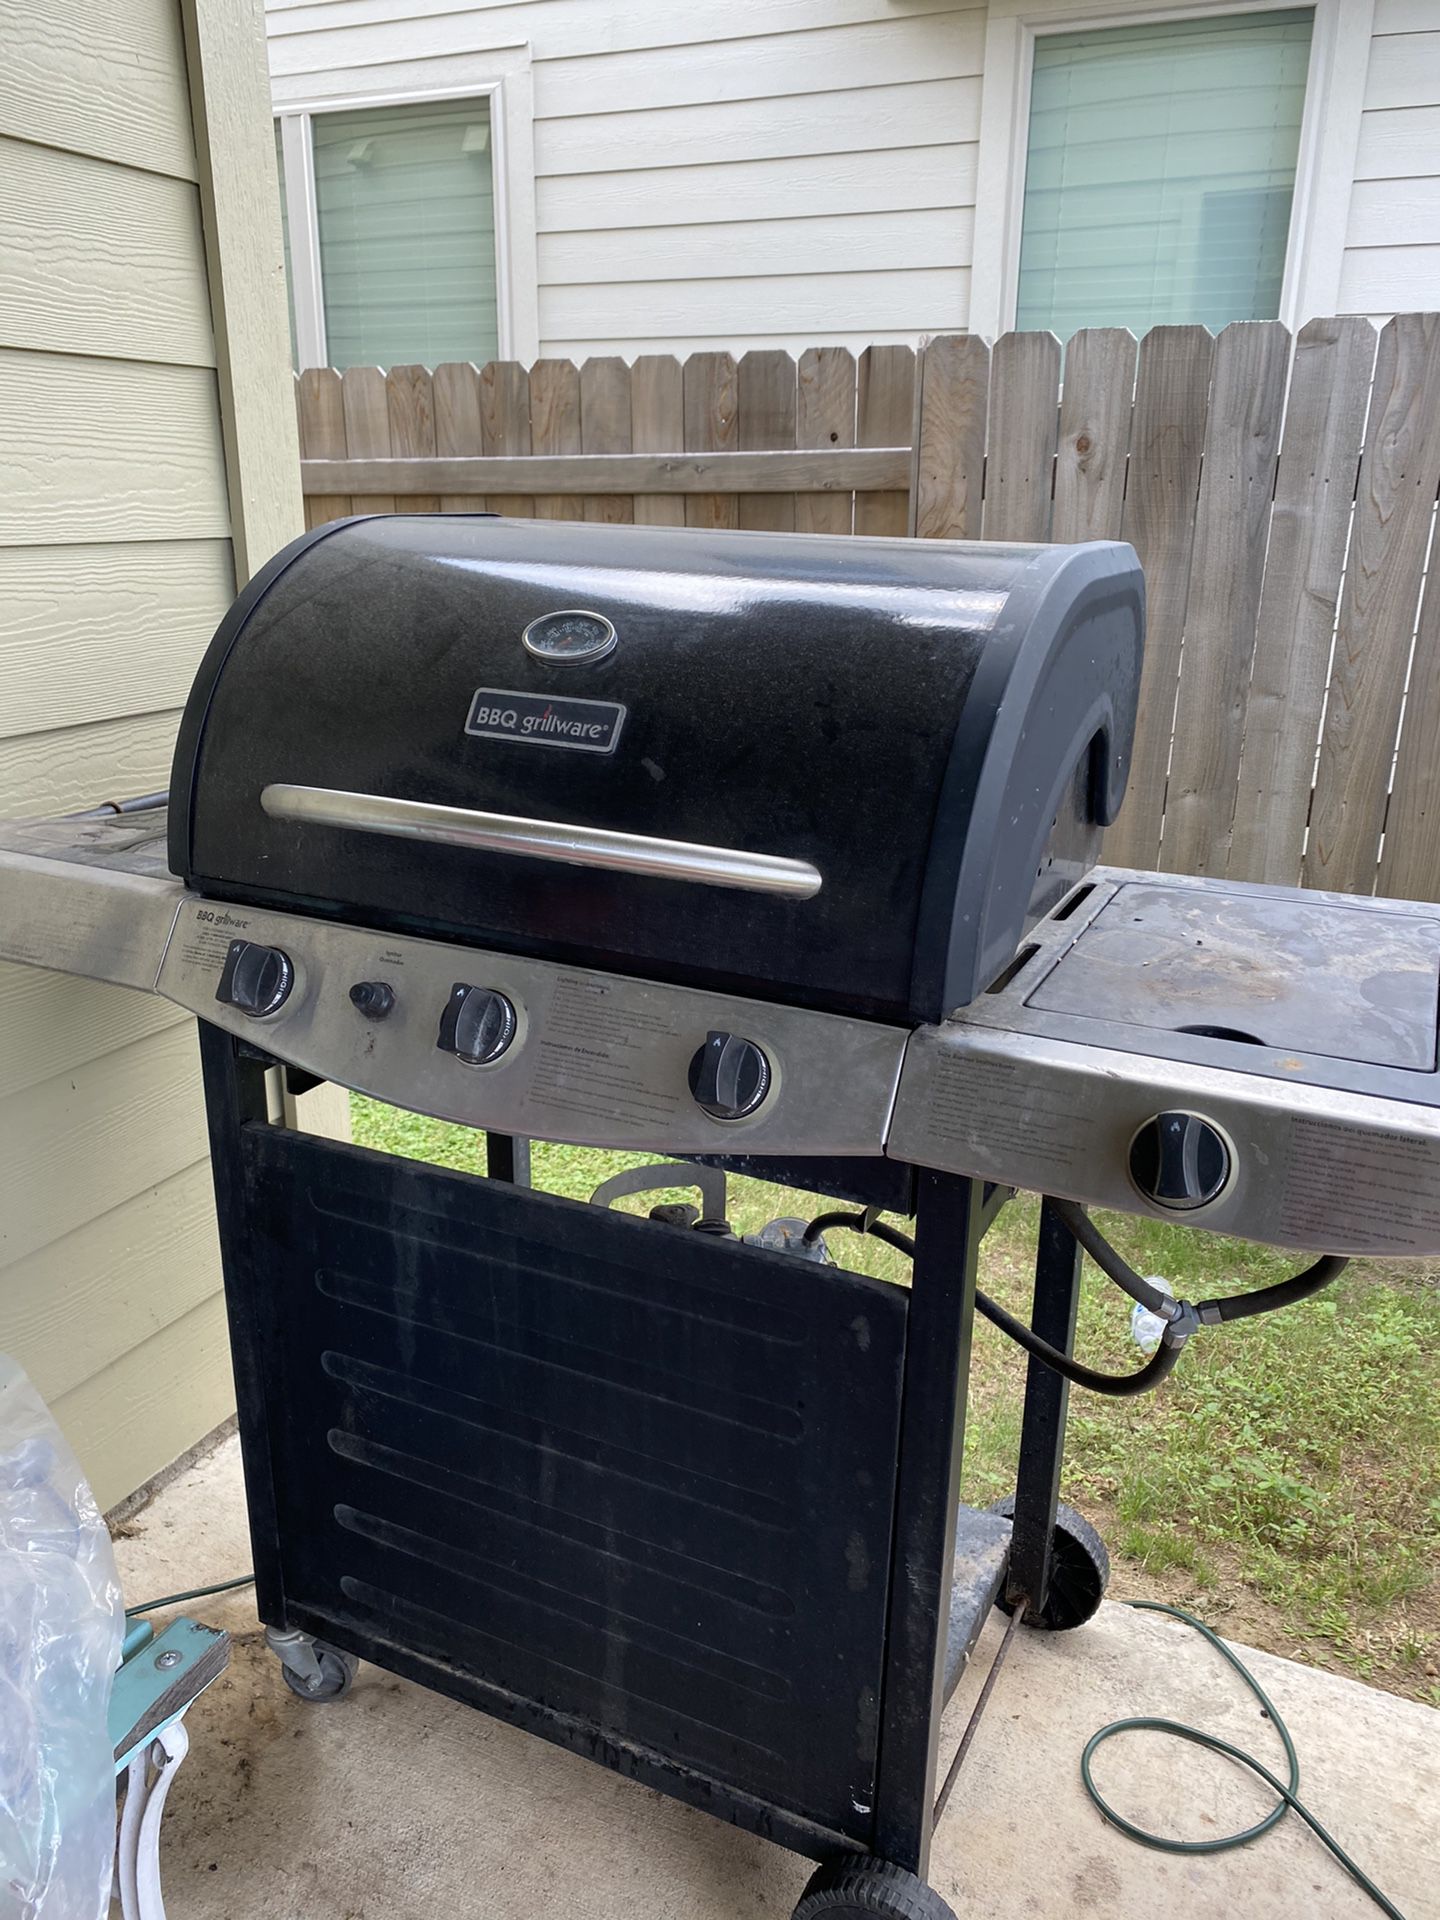 Propane grill in good condition